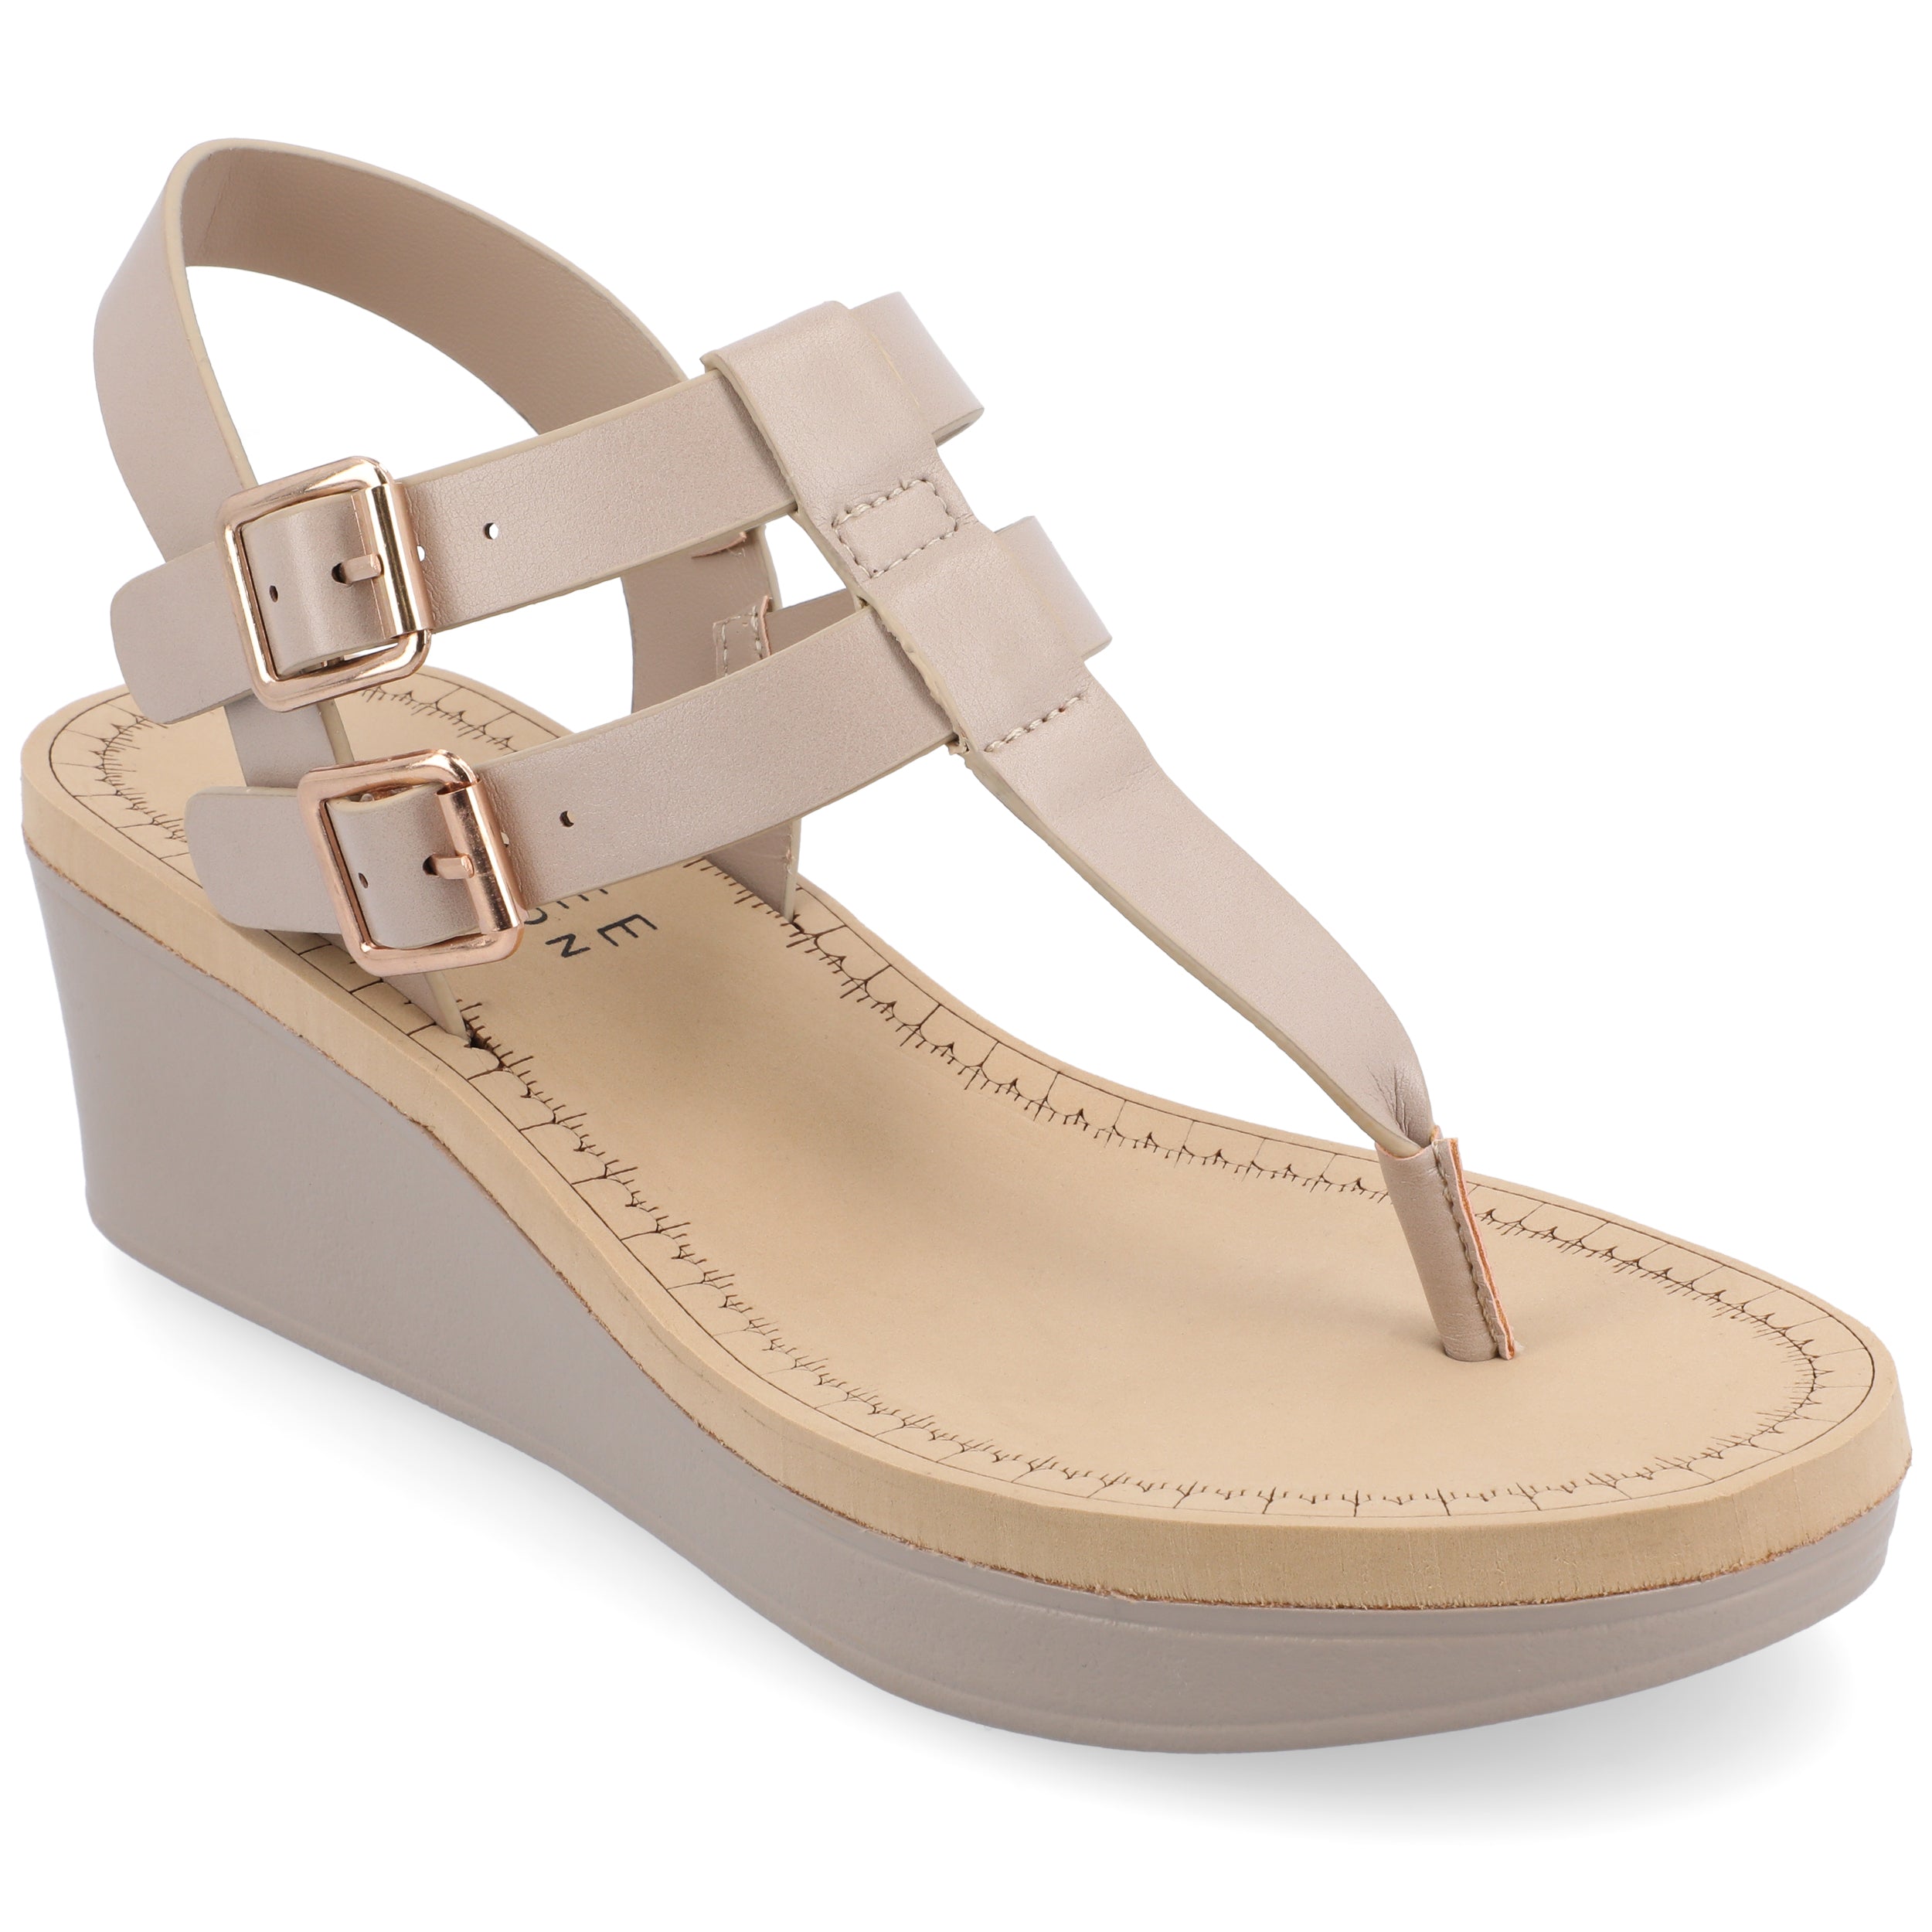 Buy Inc.5 Women's Beige T-Strap Wedges for Women at Best Price @ Tata CLiQ